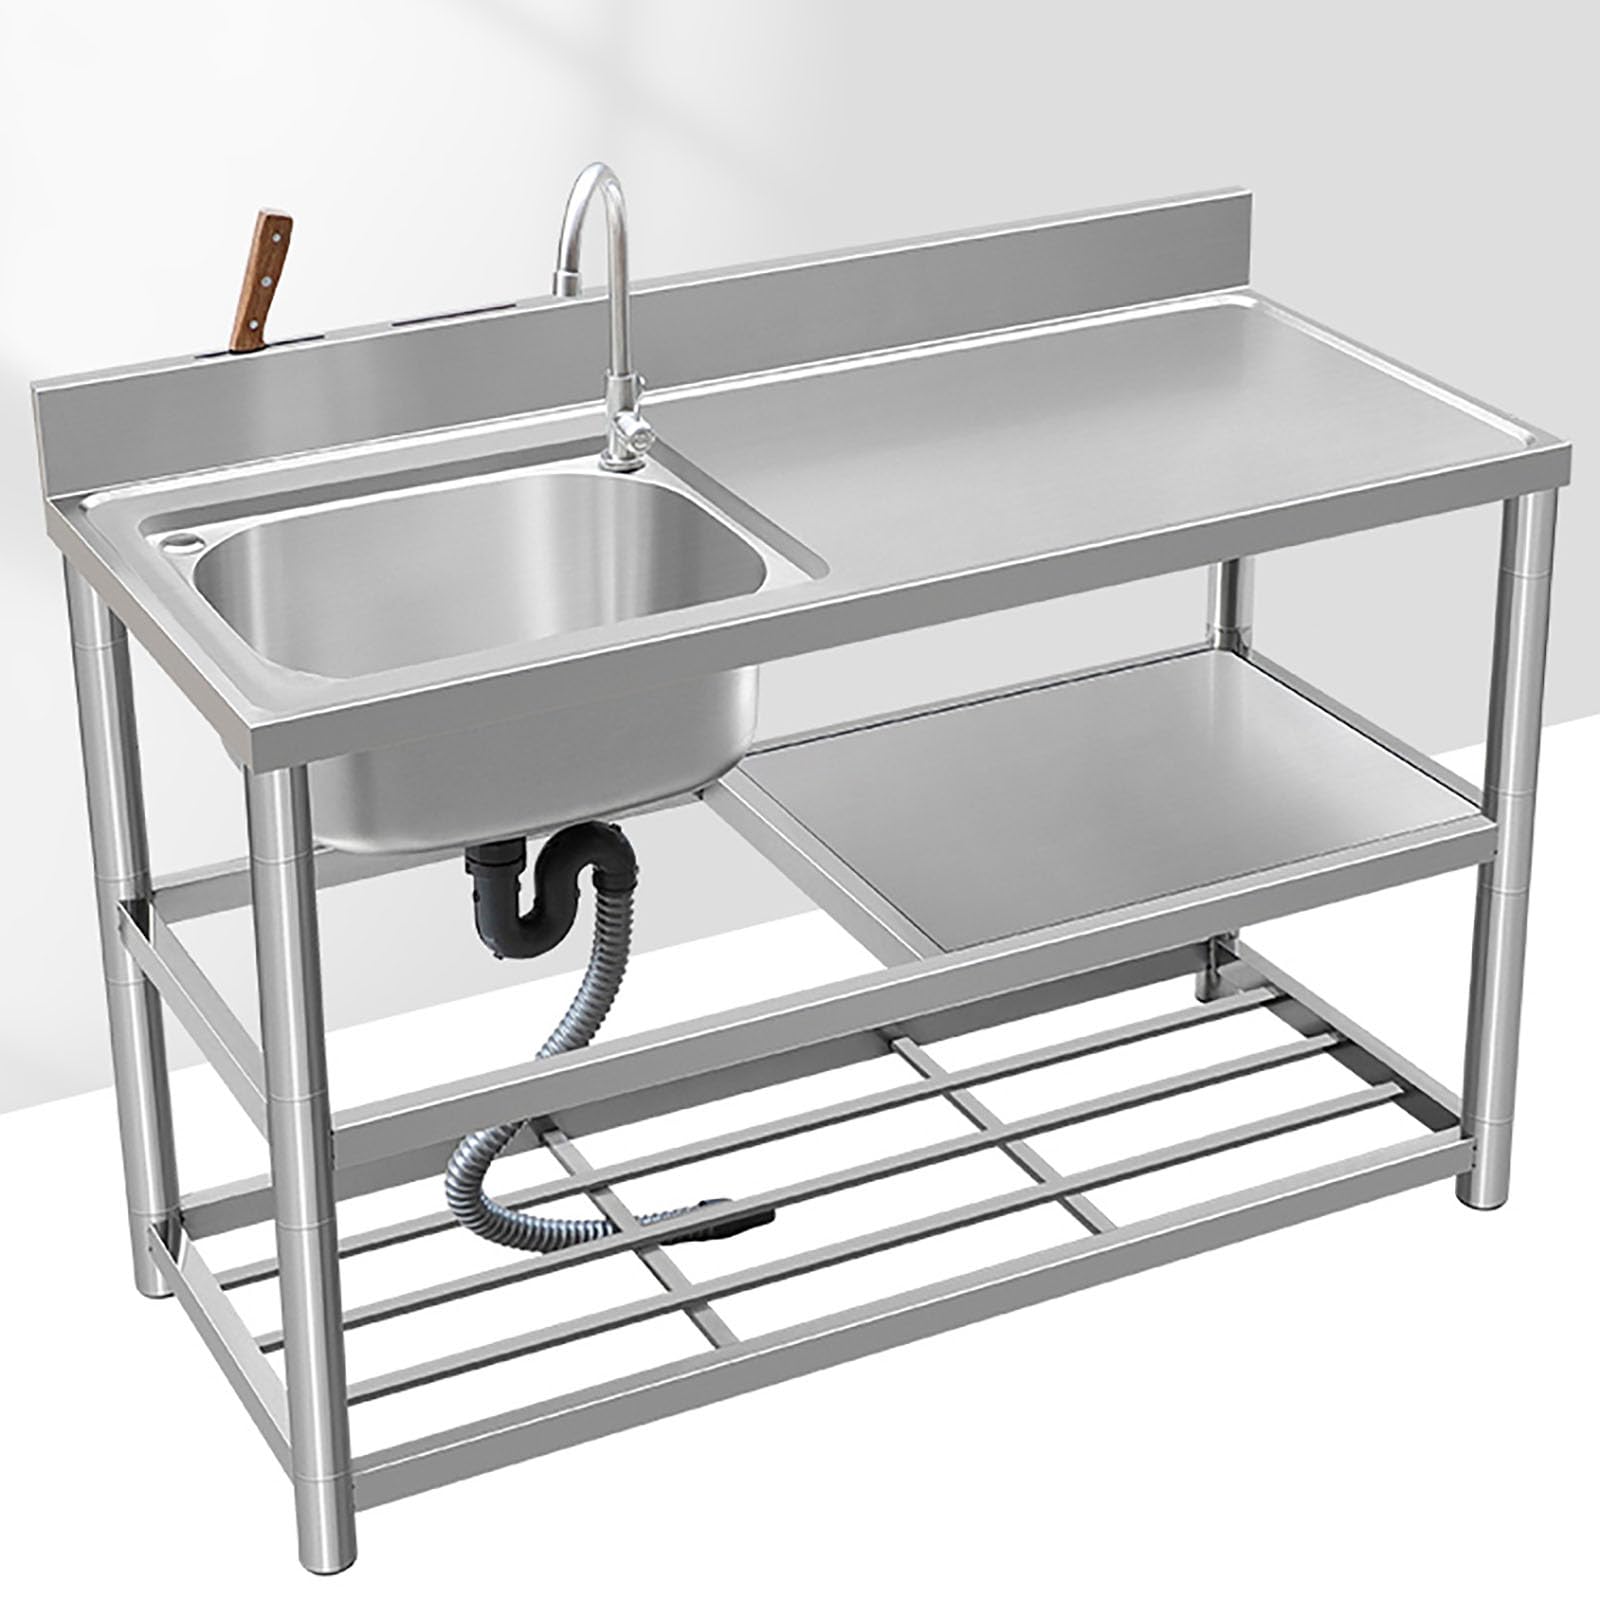 NYCDA Utility Free-Standing Commercial Sink